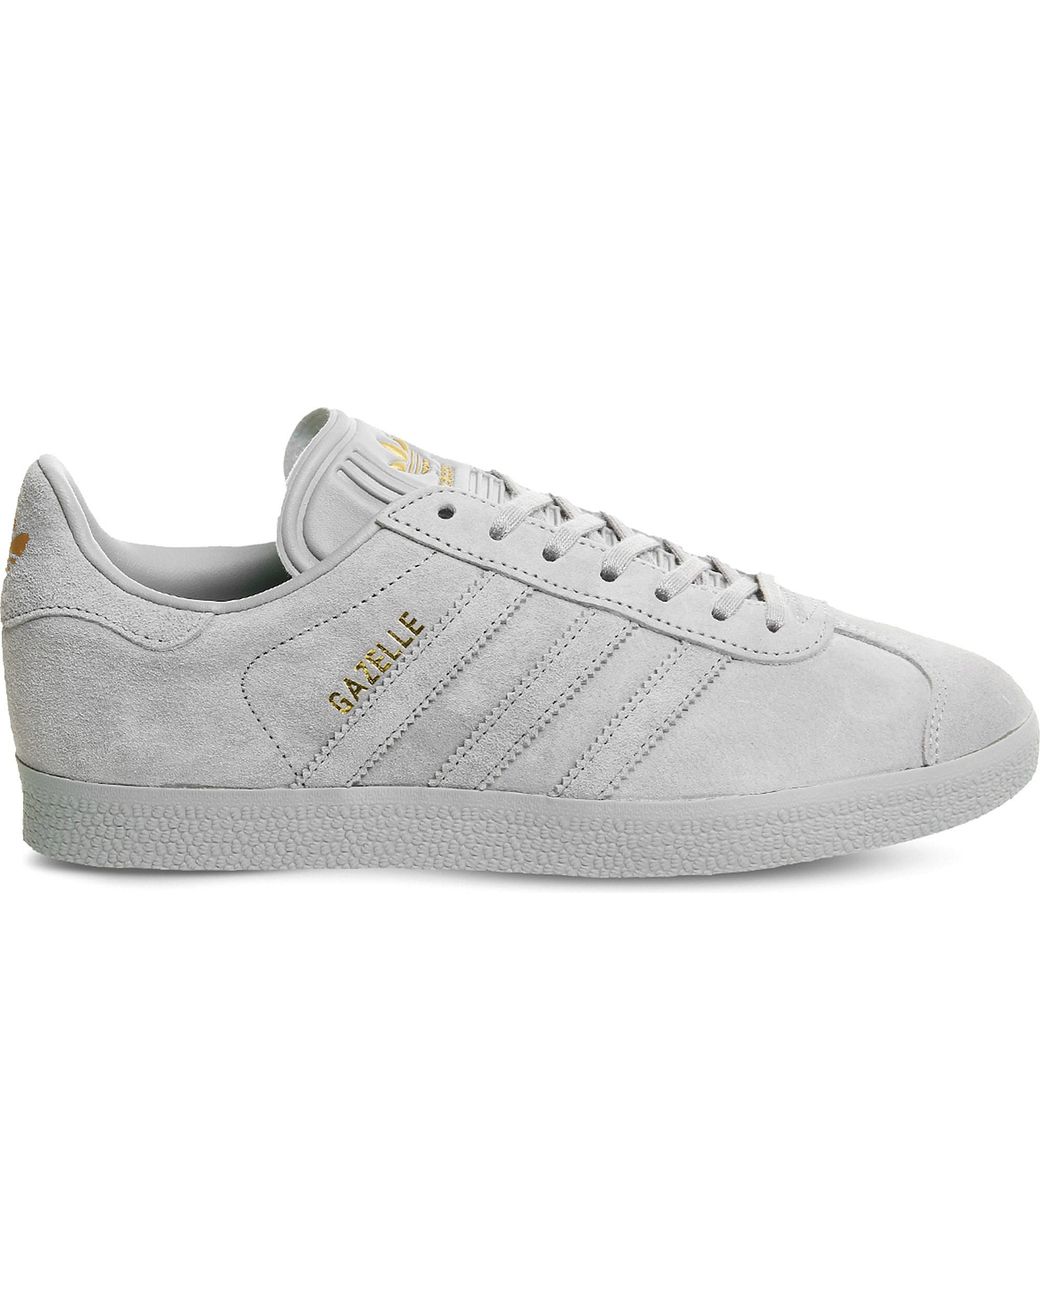 adidas Gazelle Low-top Suede Trainers in Grey for Men Lyst UK